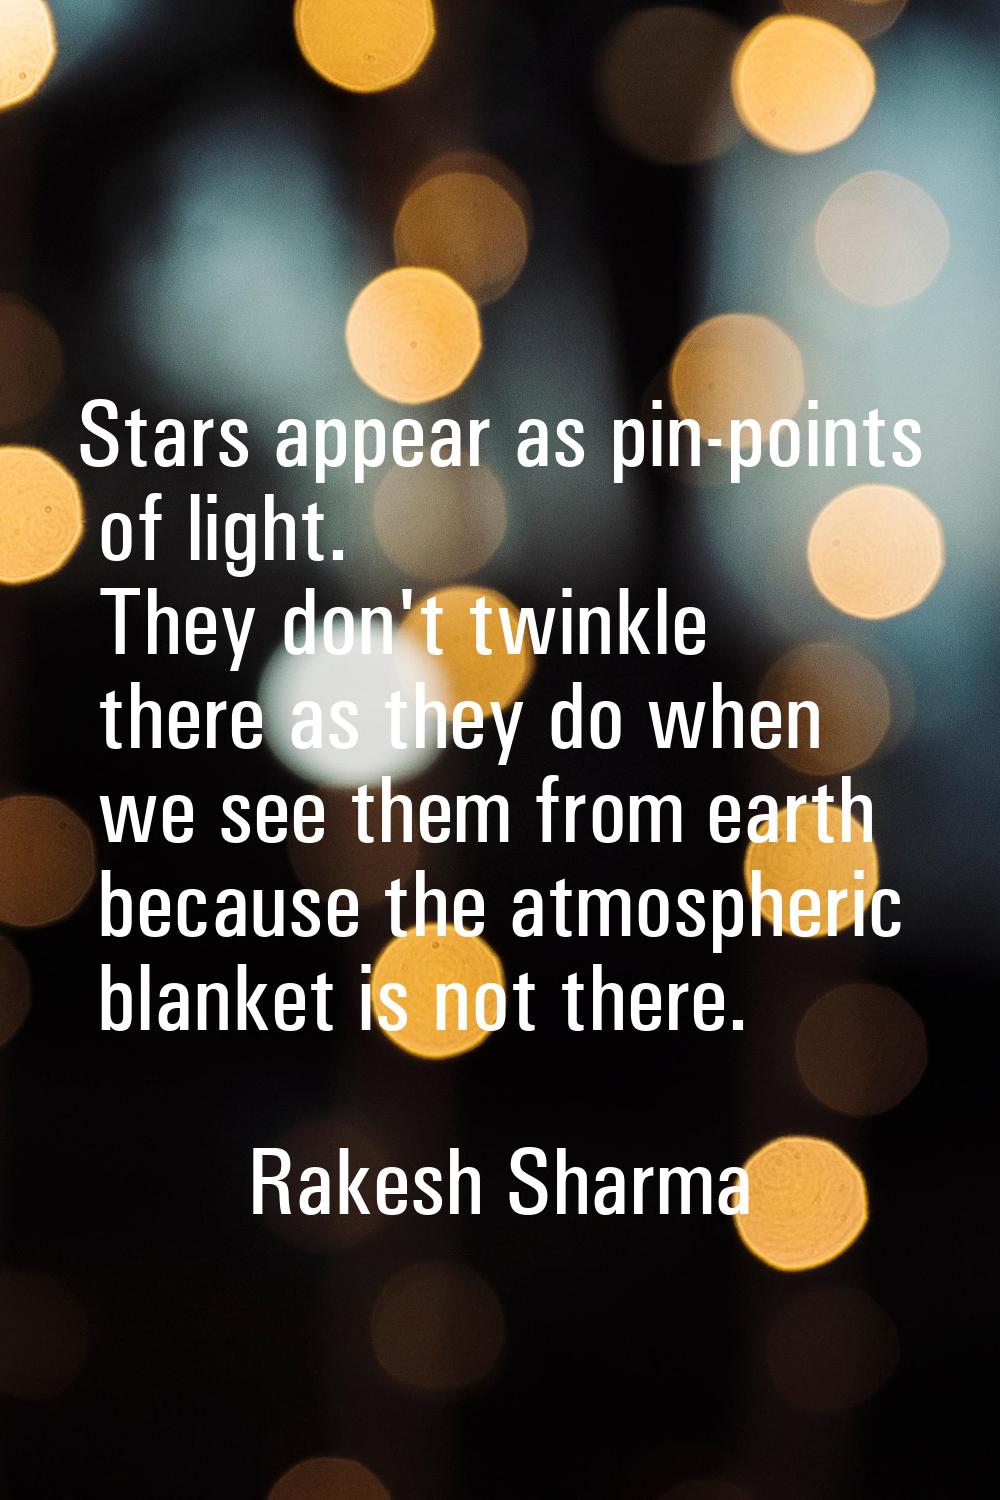 Stars appear as pin-points of light. They don't twinkle there as they do when we see them from eart